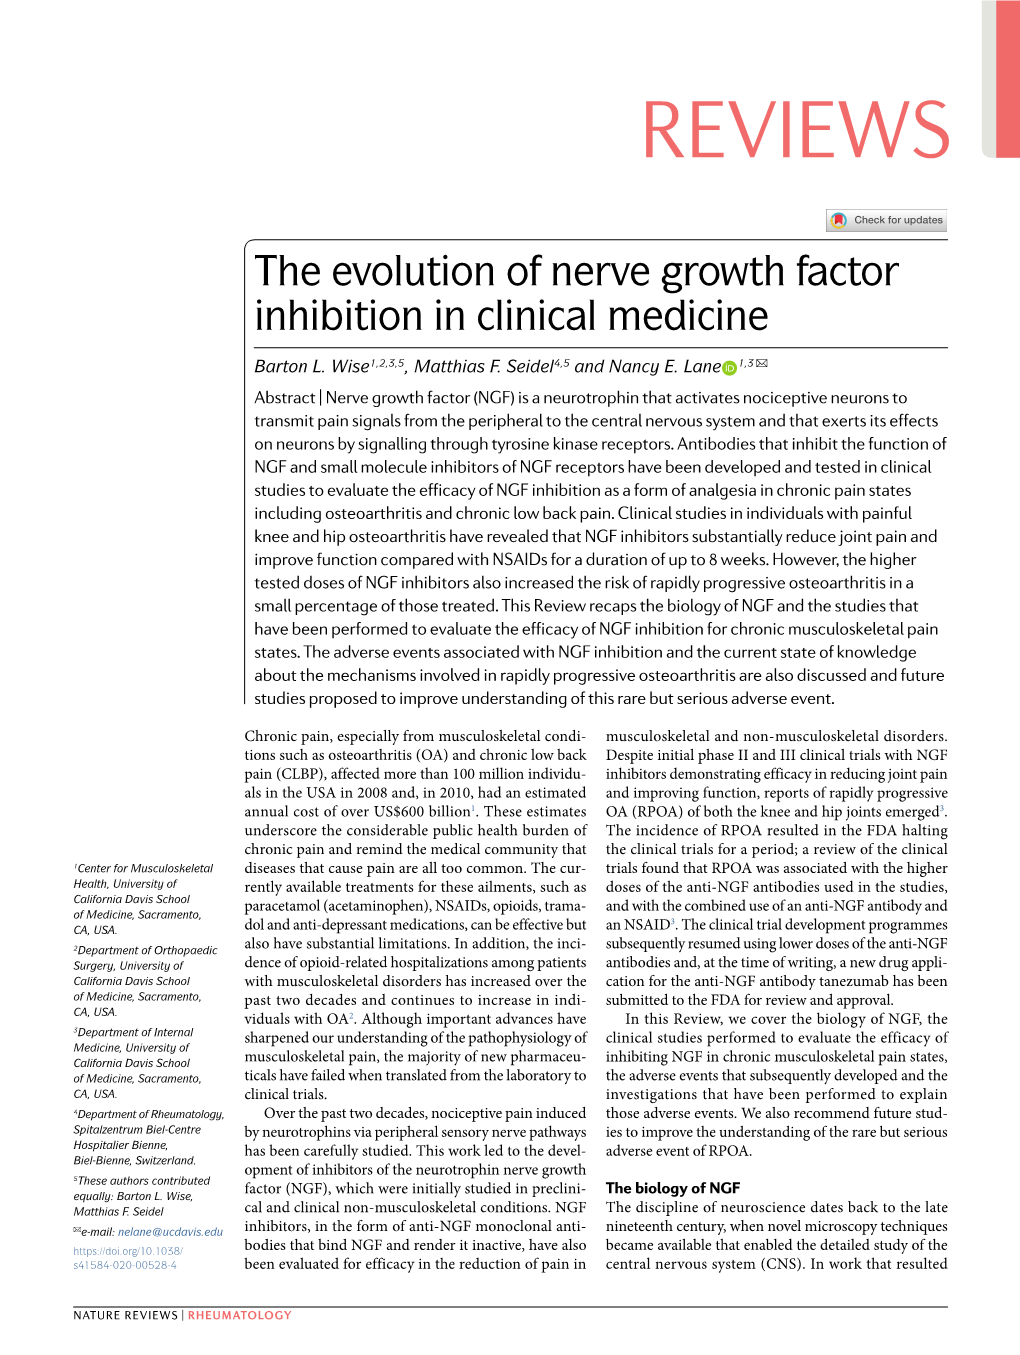 The Evolution of Nerve Growth Factor Inhibition in Clinical Medicine